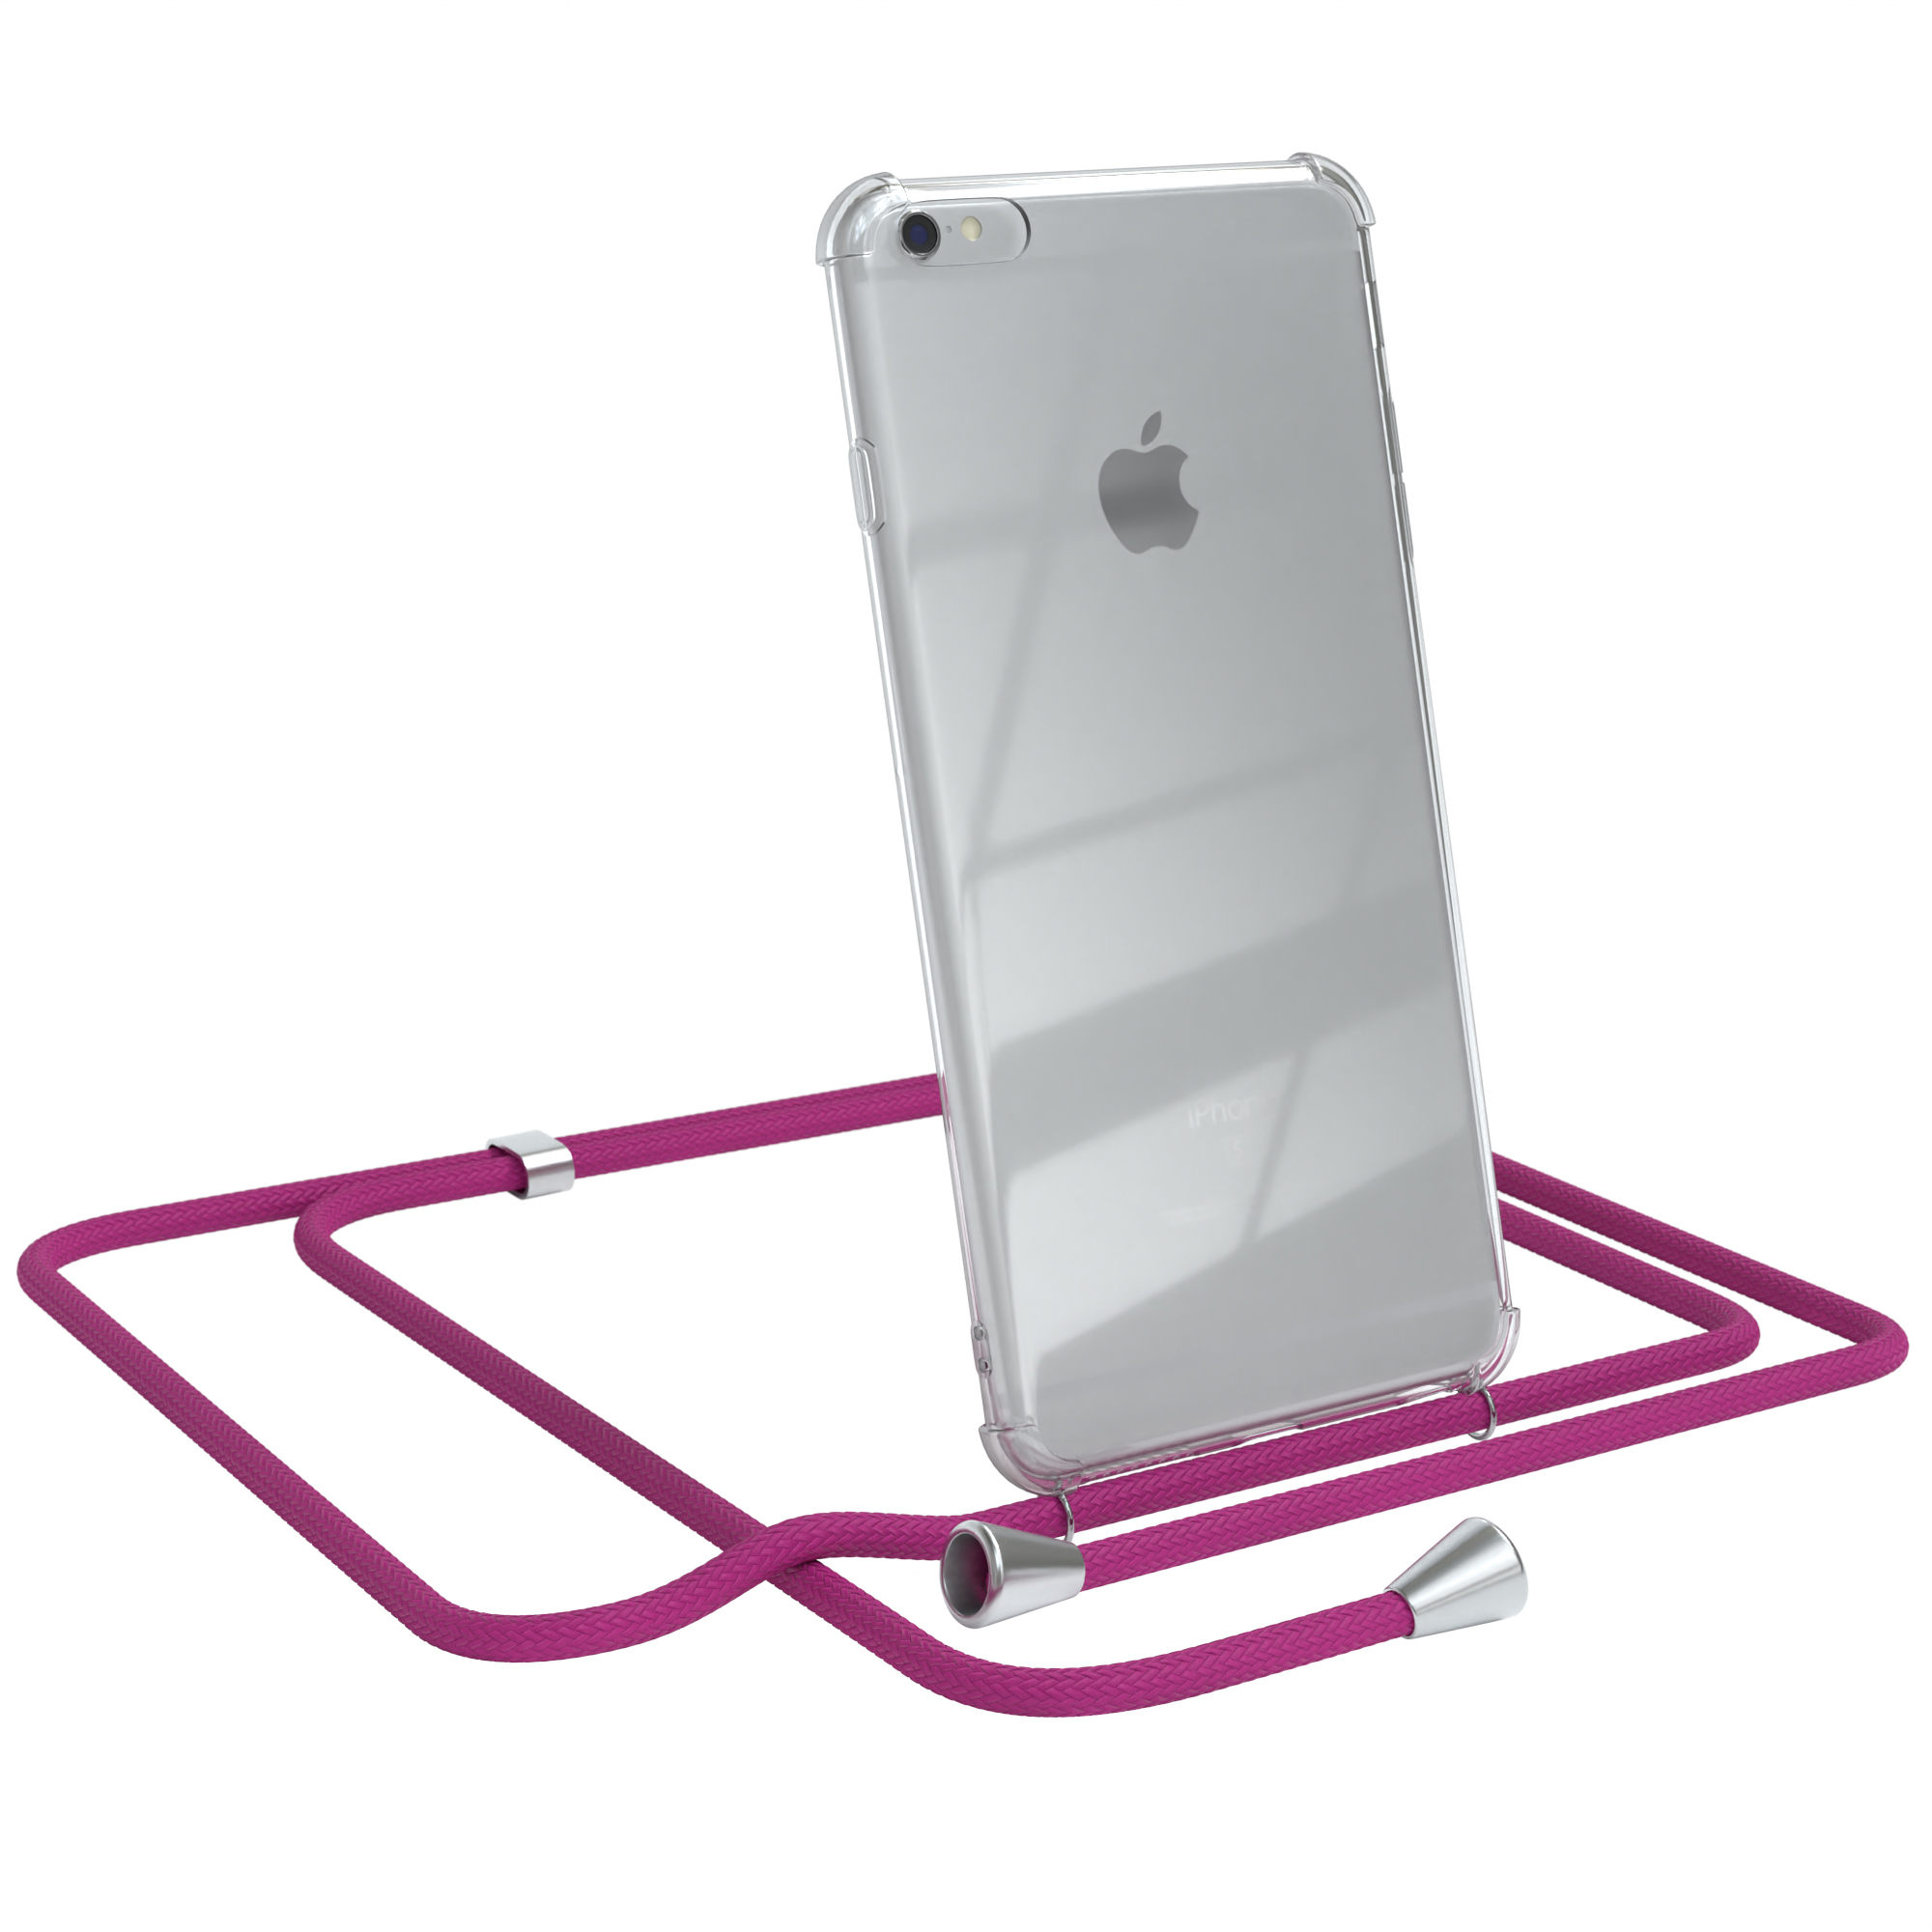 CASE Silber Cover Plus, Pink Apple, 6 / Clips 6S mit EAZY Plus Clear Umhängetasche, Umhängeband, iPhone /